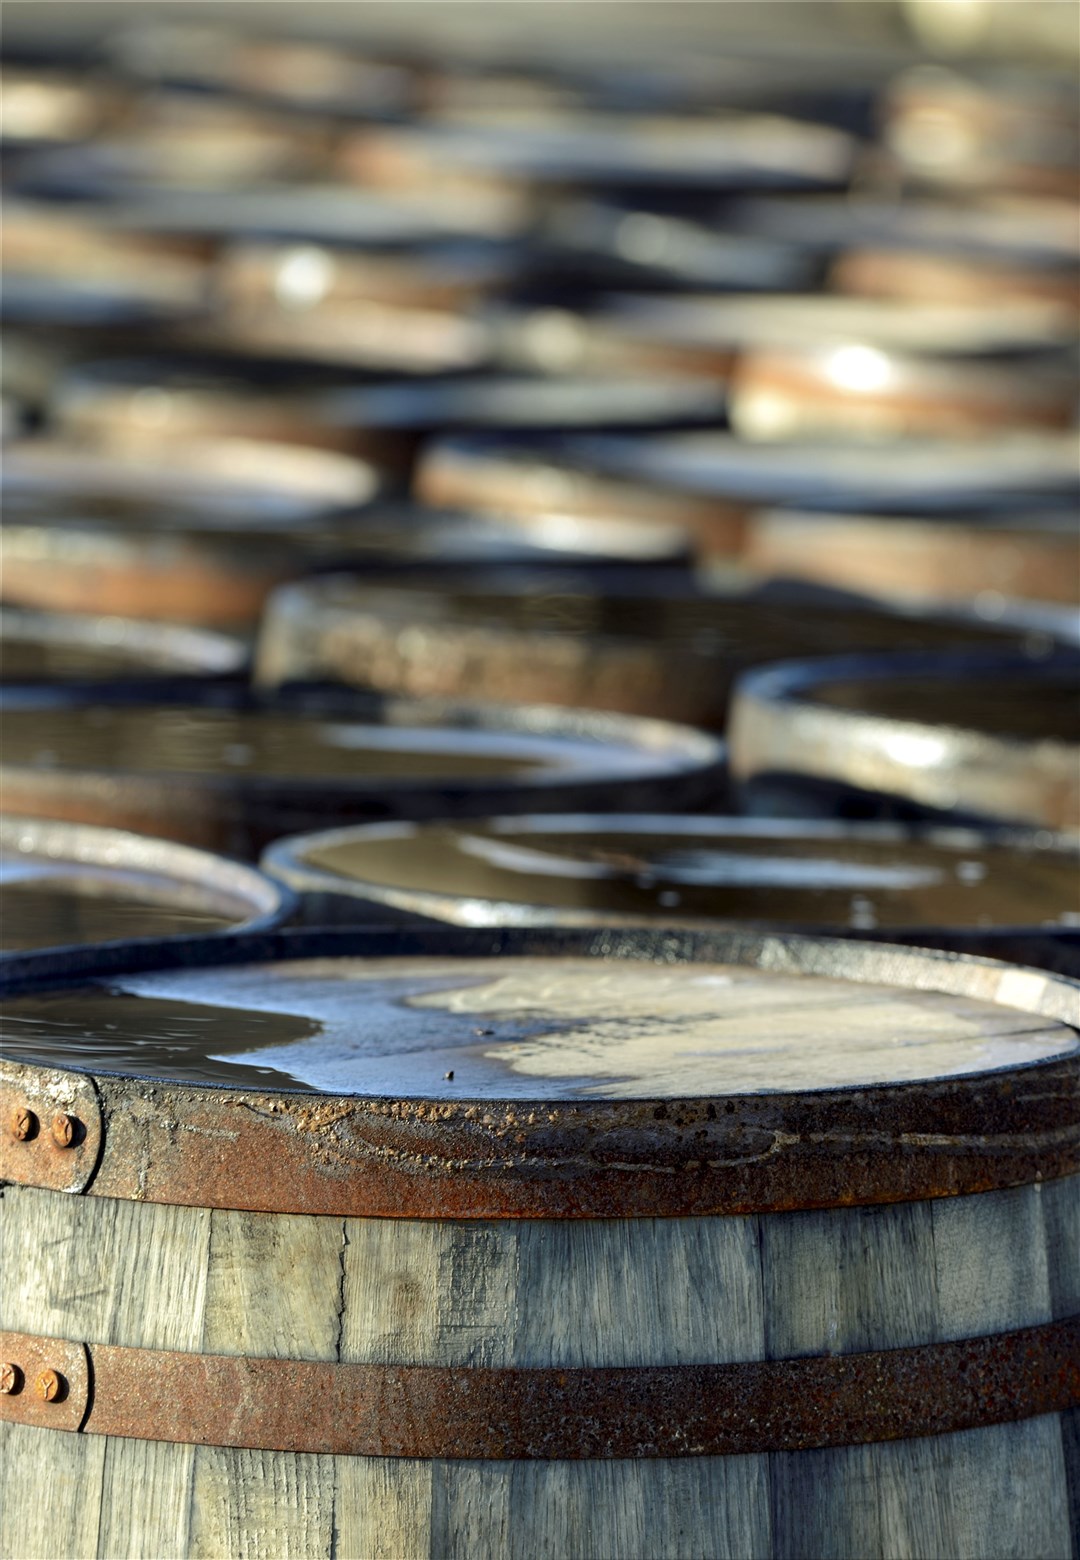 Whisky casks at the Dalmore Distillery.Picture: Gary Anthony. Image No..